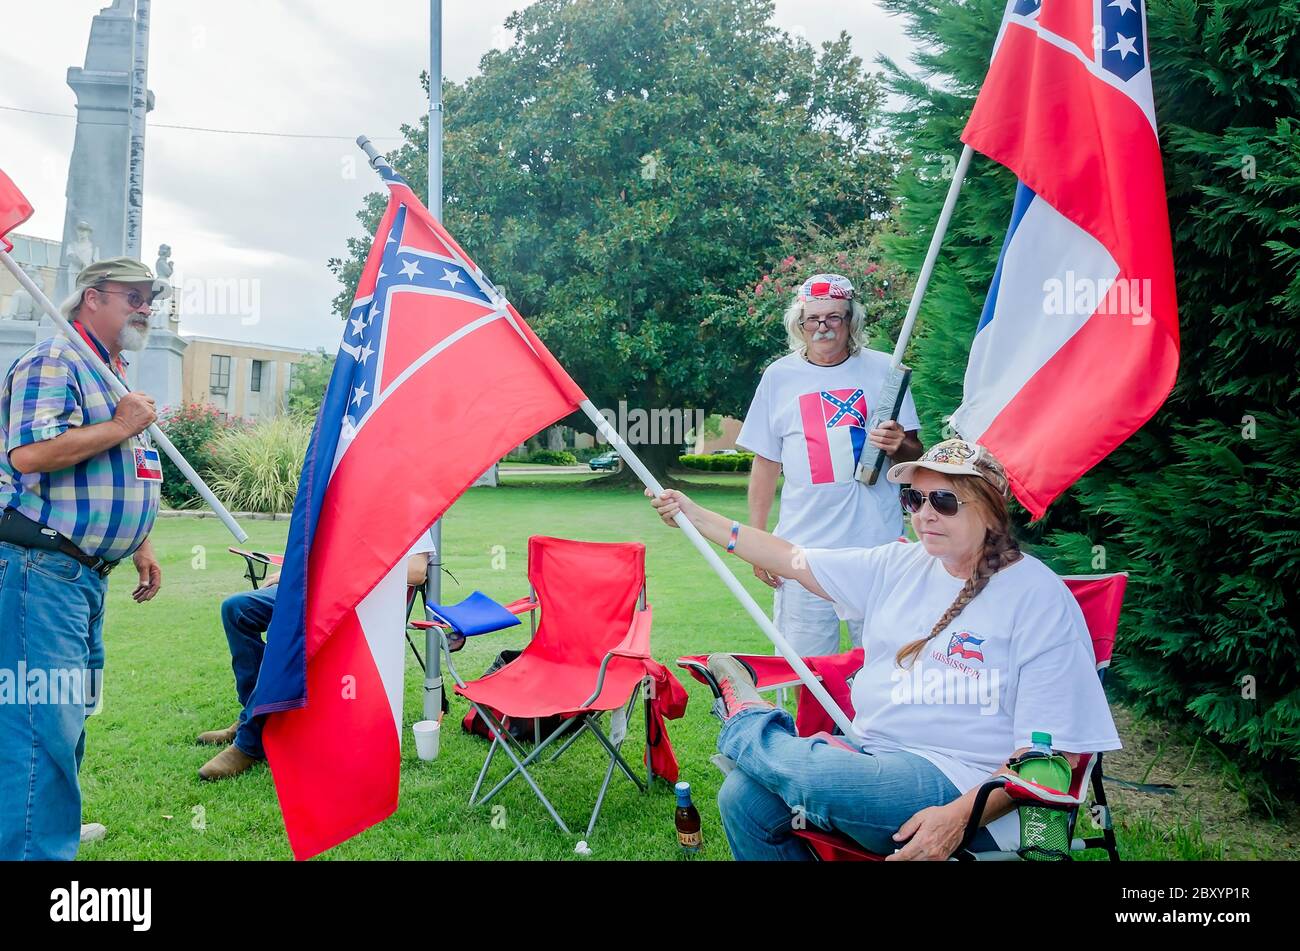 Mississippians protest the removal of a Confederate emblem from the Mississippi state flag, Aug. 10, 2016, in Greenwood, Mississippi. Stock Photo